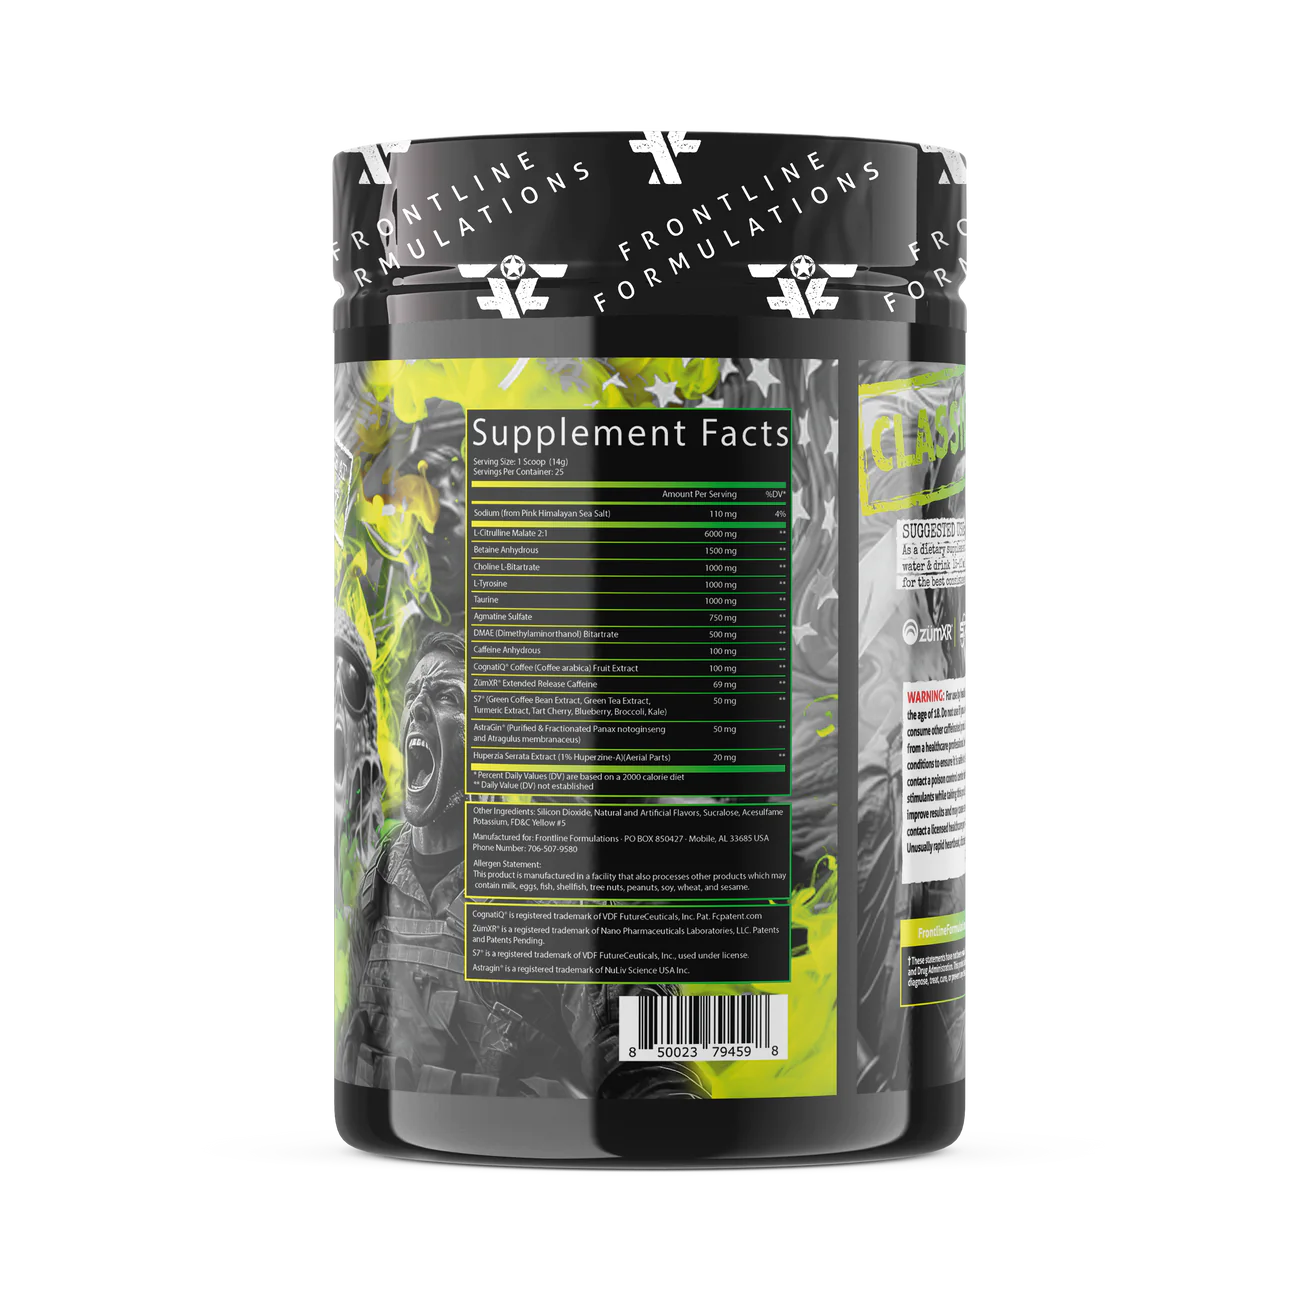 Operation Delirium Pumpageddon Creamax Stack Operation Delirium Introducing Operation Delirium, the cutting-edge preworkout designed for warriors seeking an unparalleled boost in performance and focus. This military-grade experimental formula combines the